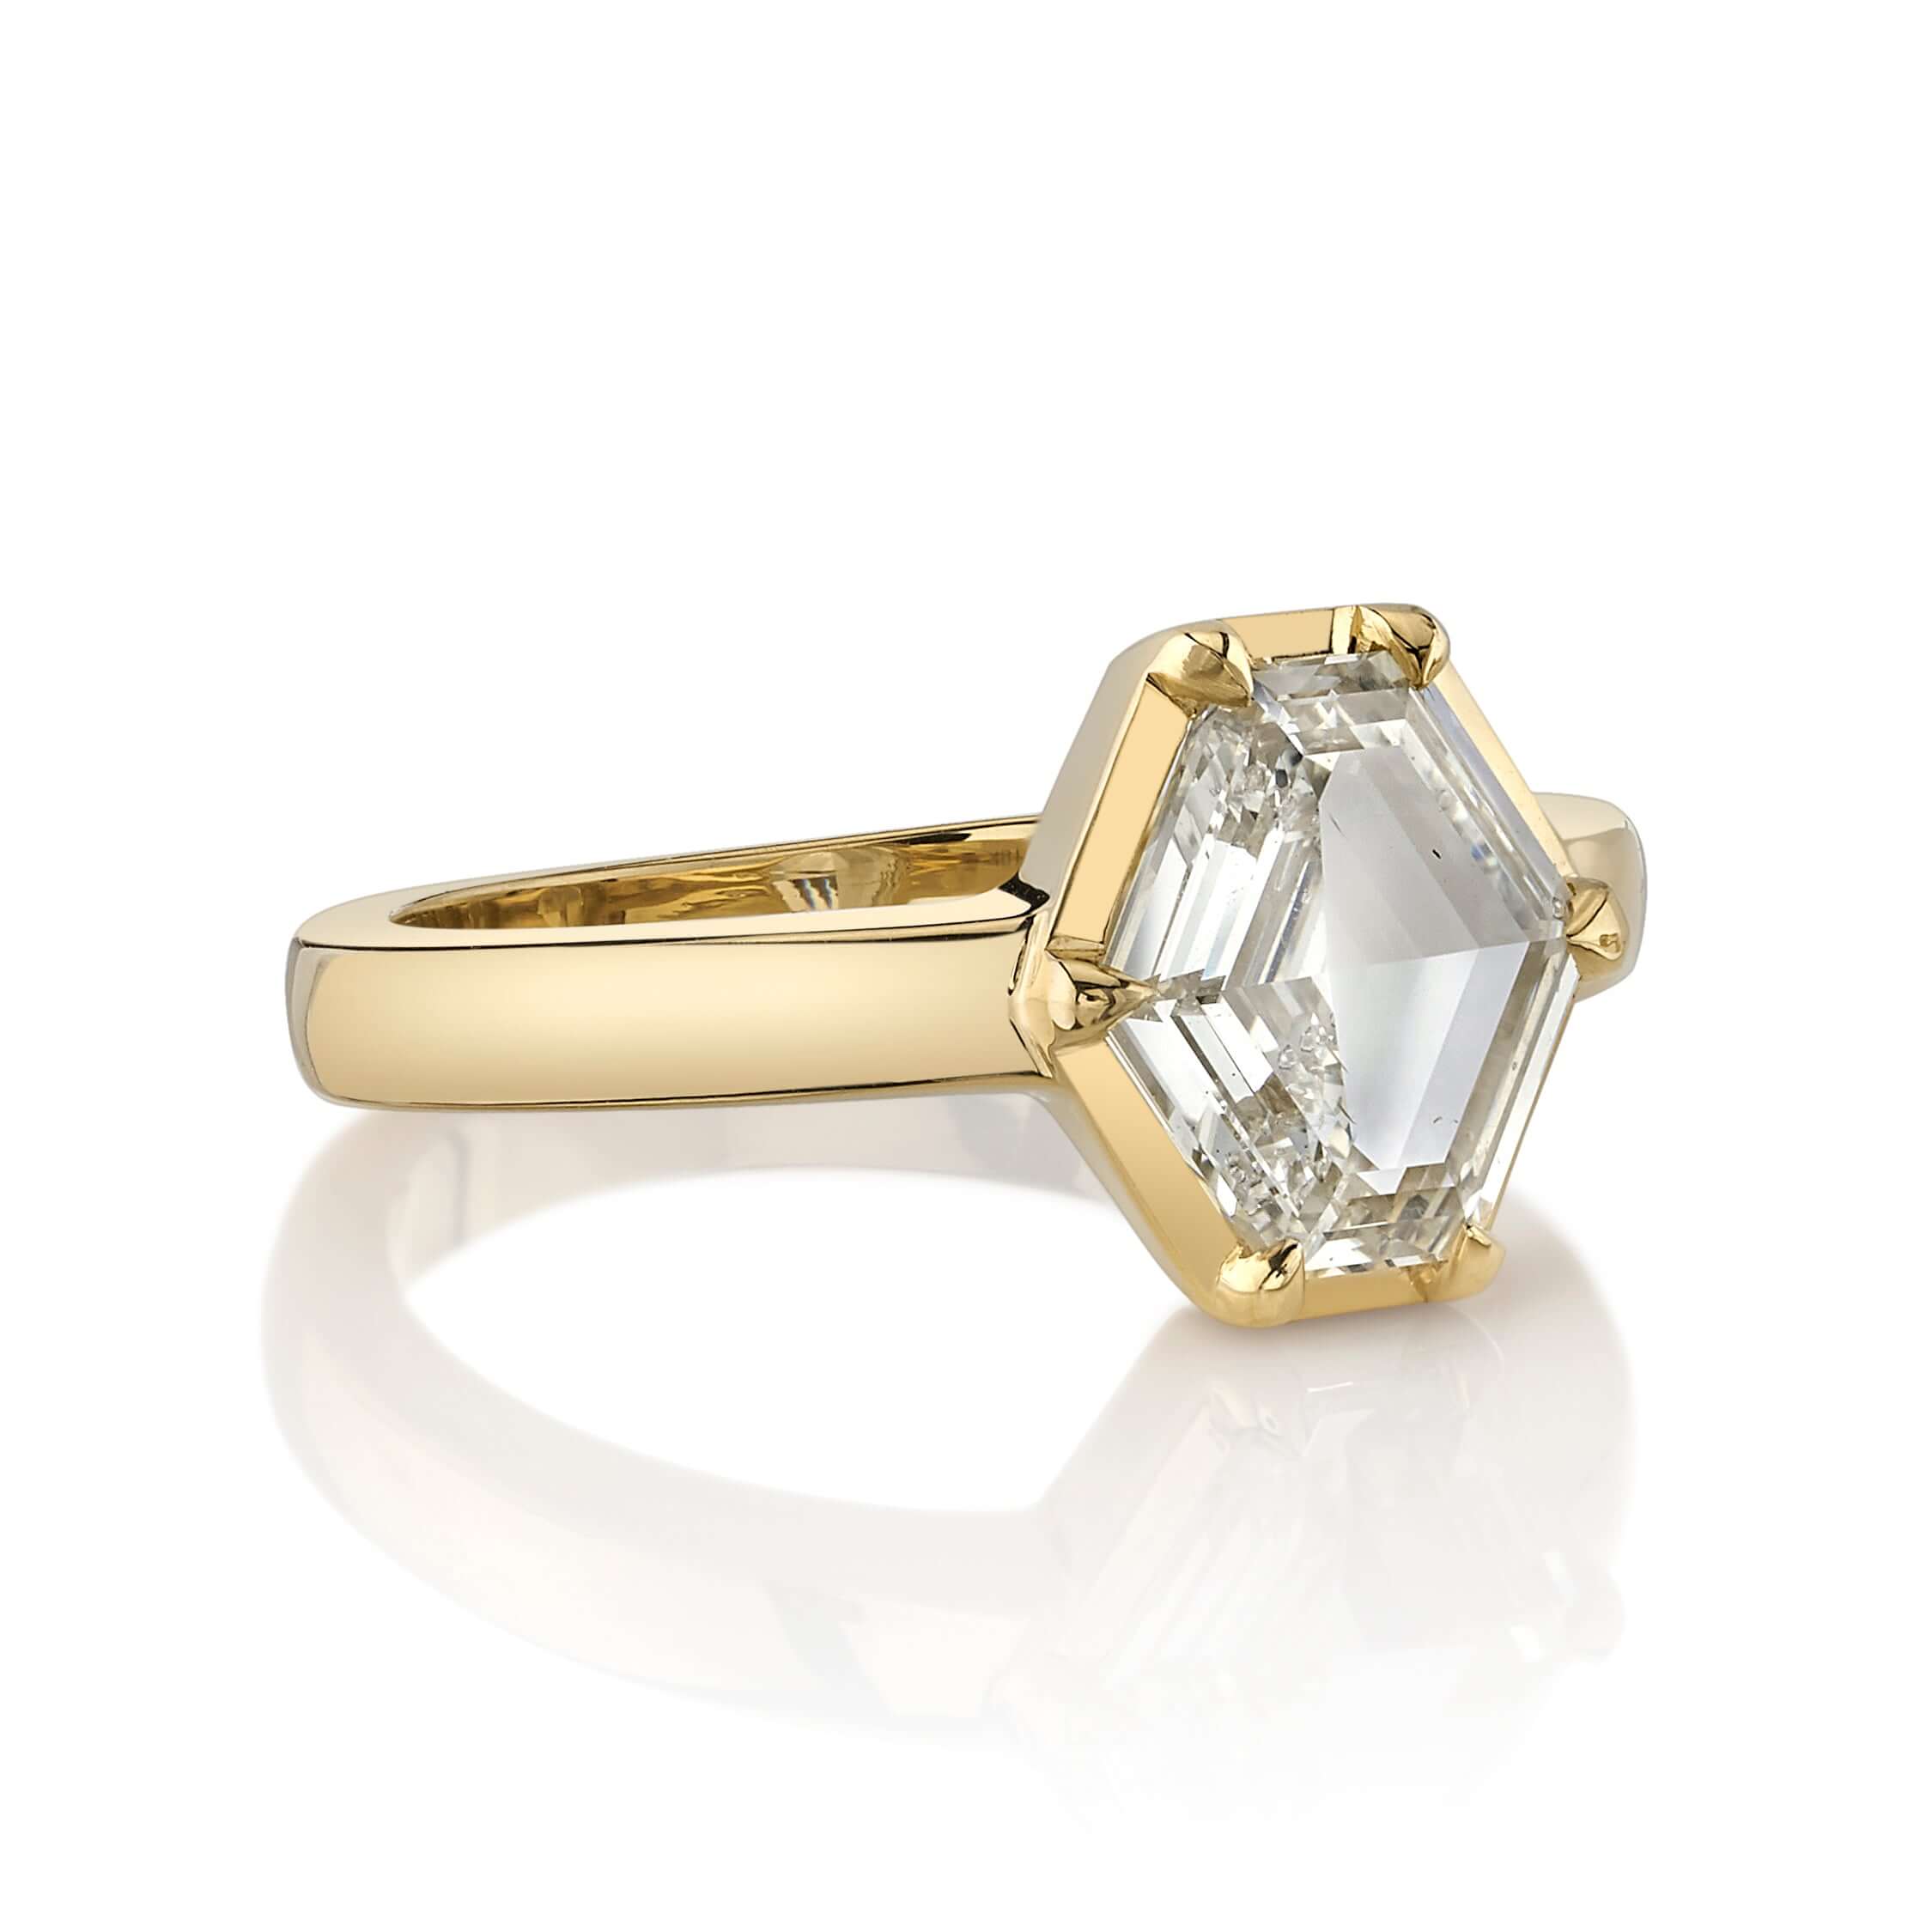 SINGLE STONE ODETTE RING featuring 1.66ct O-P/SI2 GIA certified hexagonal cut diamond set in a handcrafted 18K yellow gold mounting.